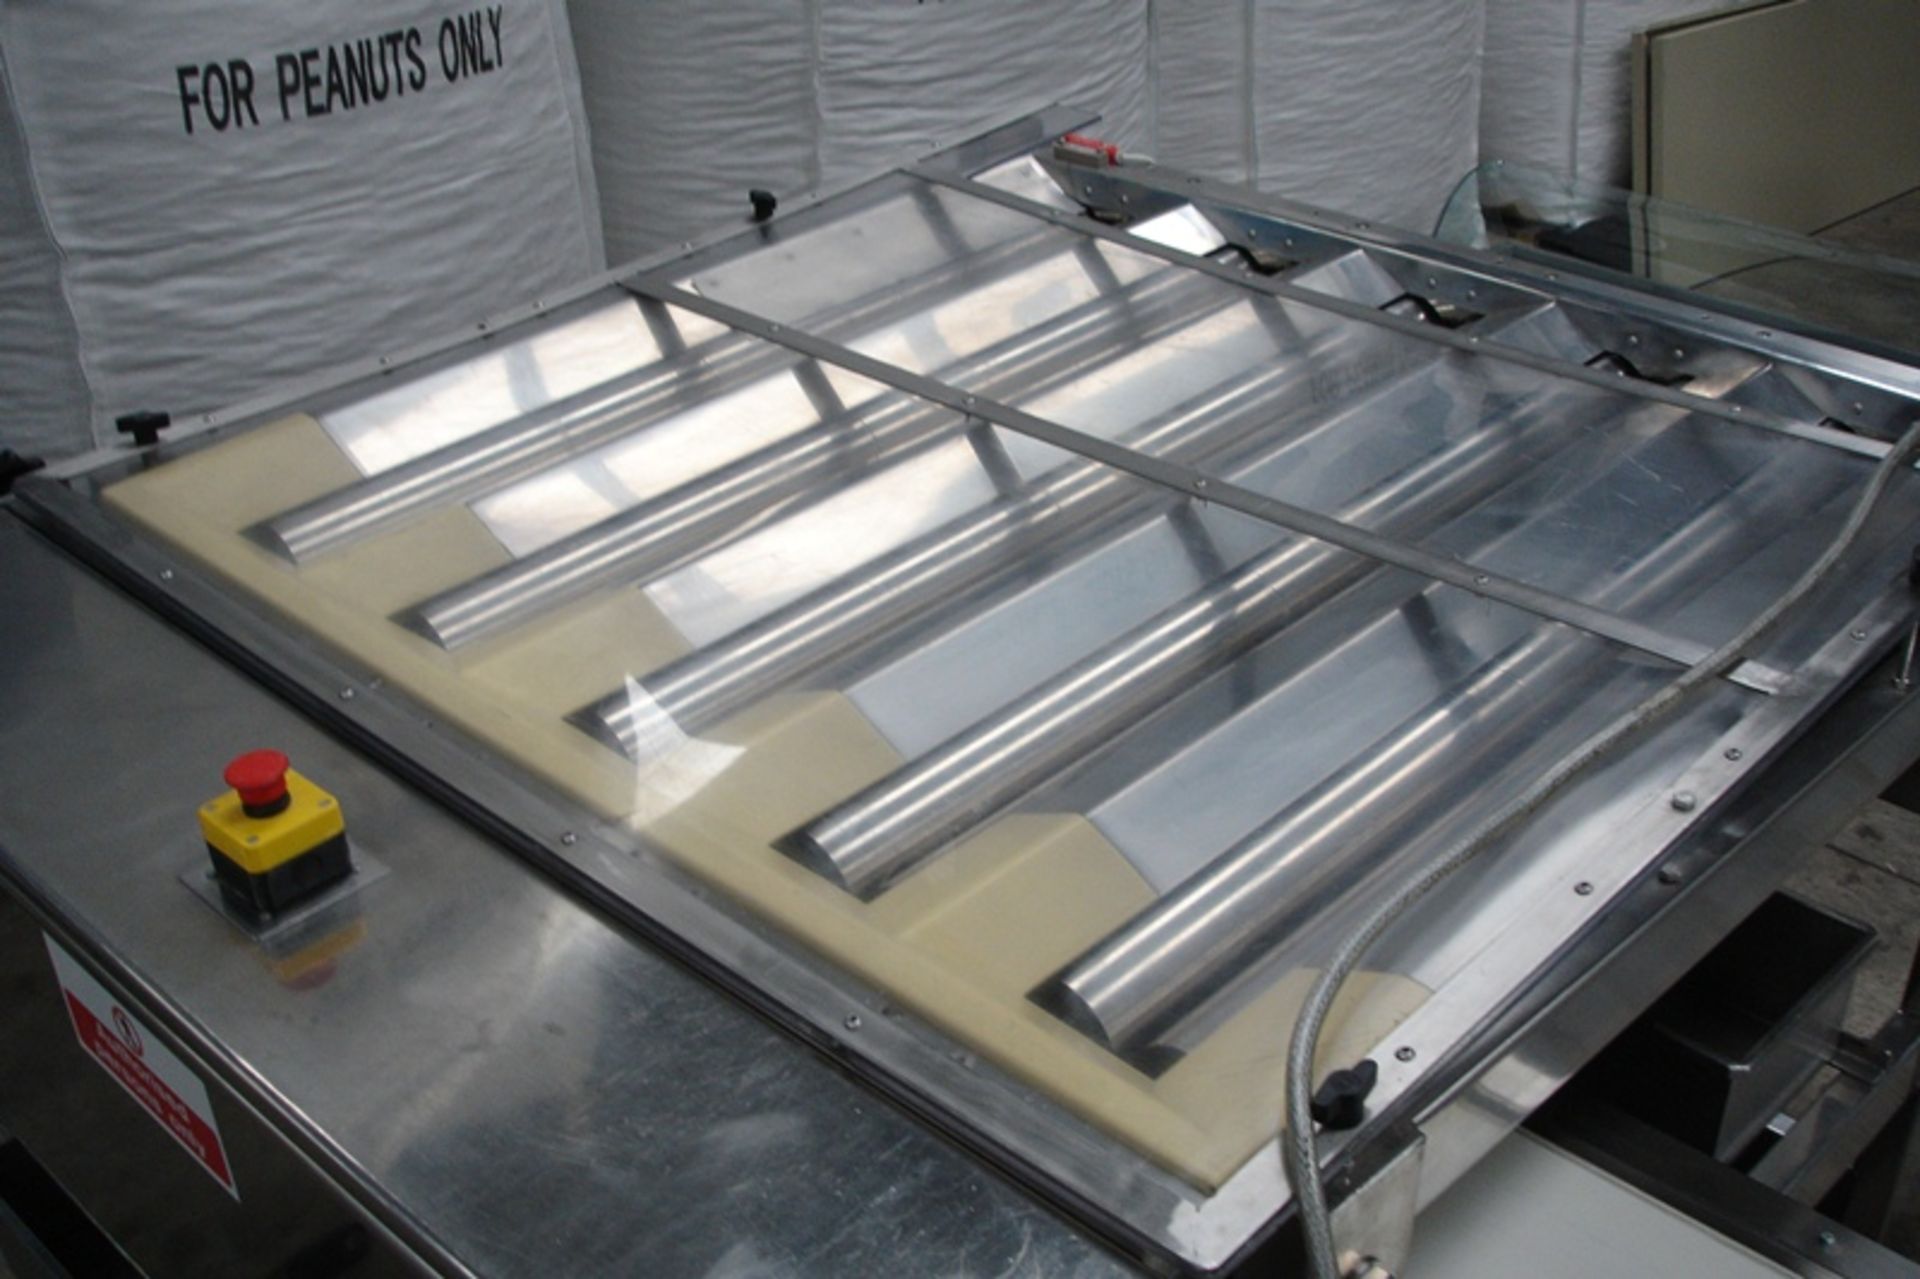 Fully Stainless Steel food grade 5 Lane Sizing / Grading Machine with Outfeed Conveyor - Image 2 of 7